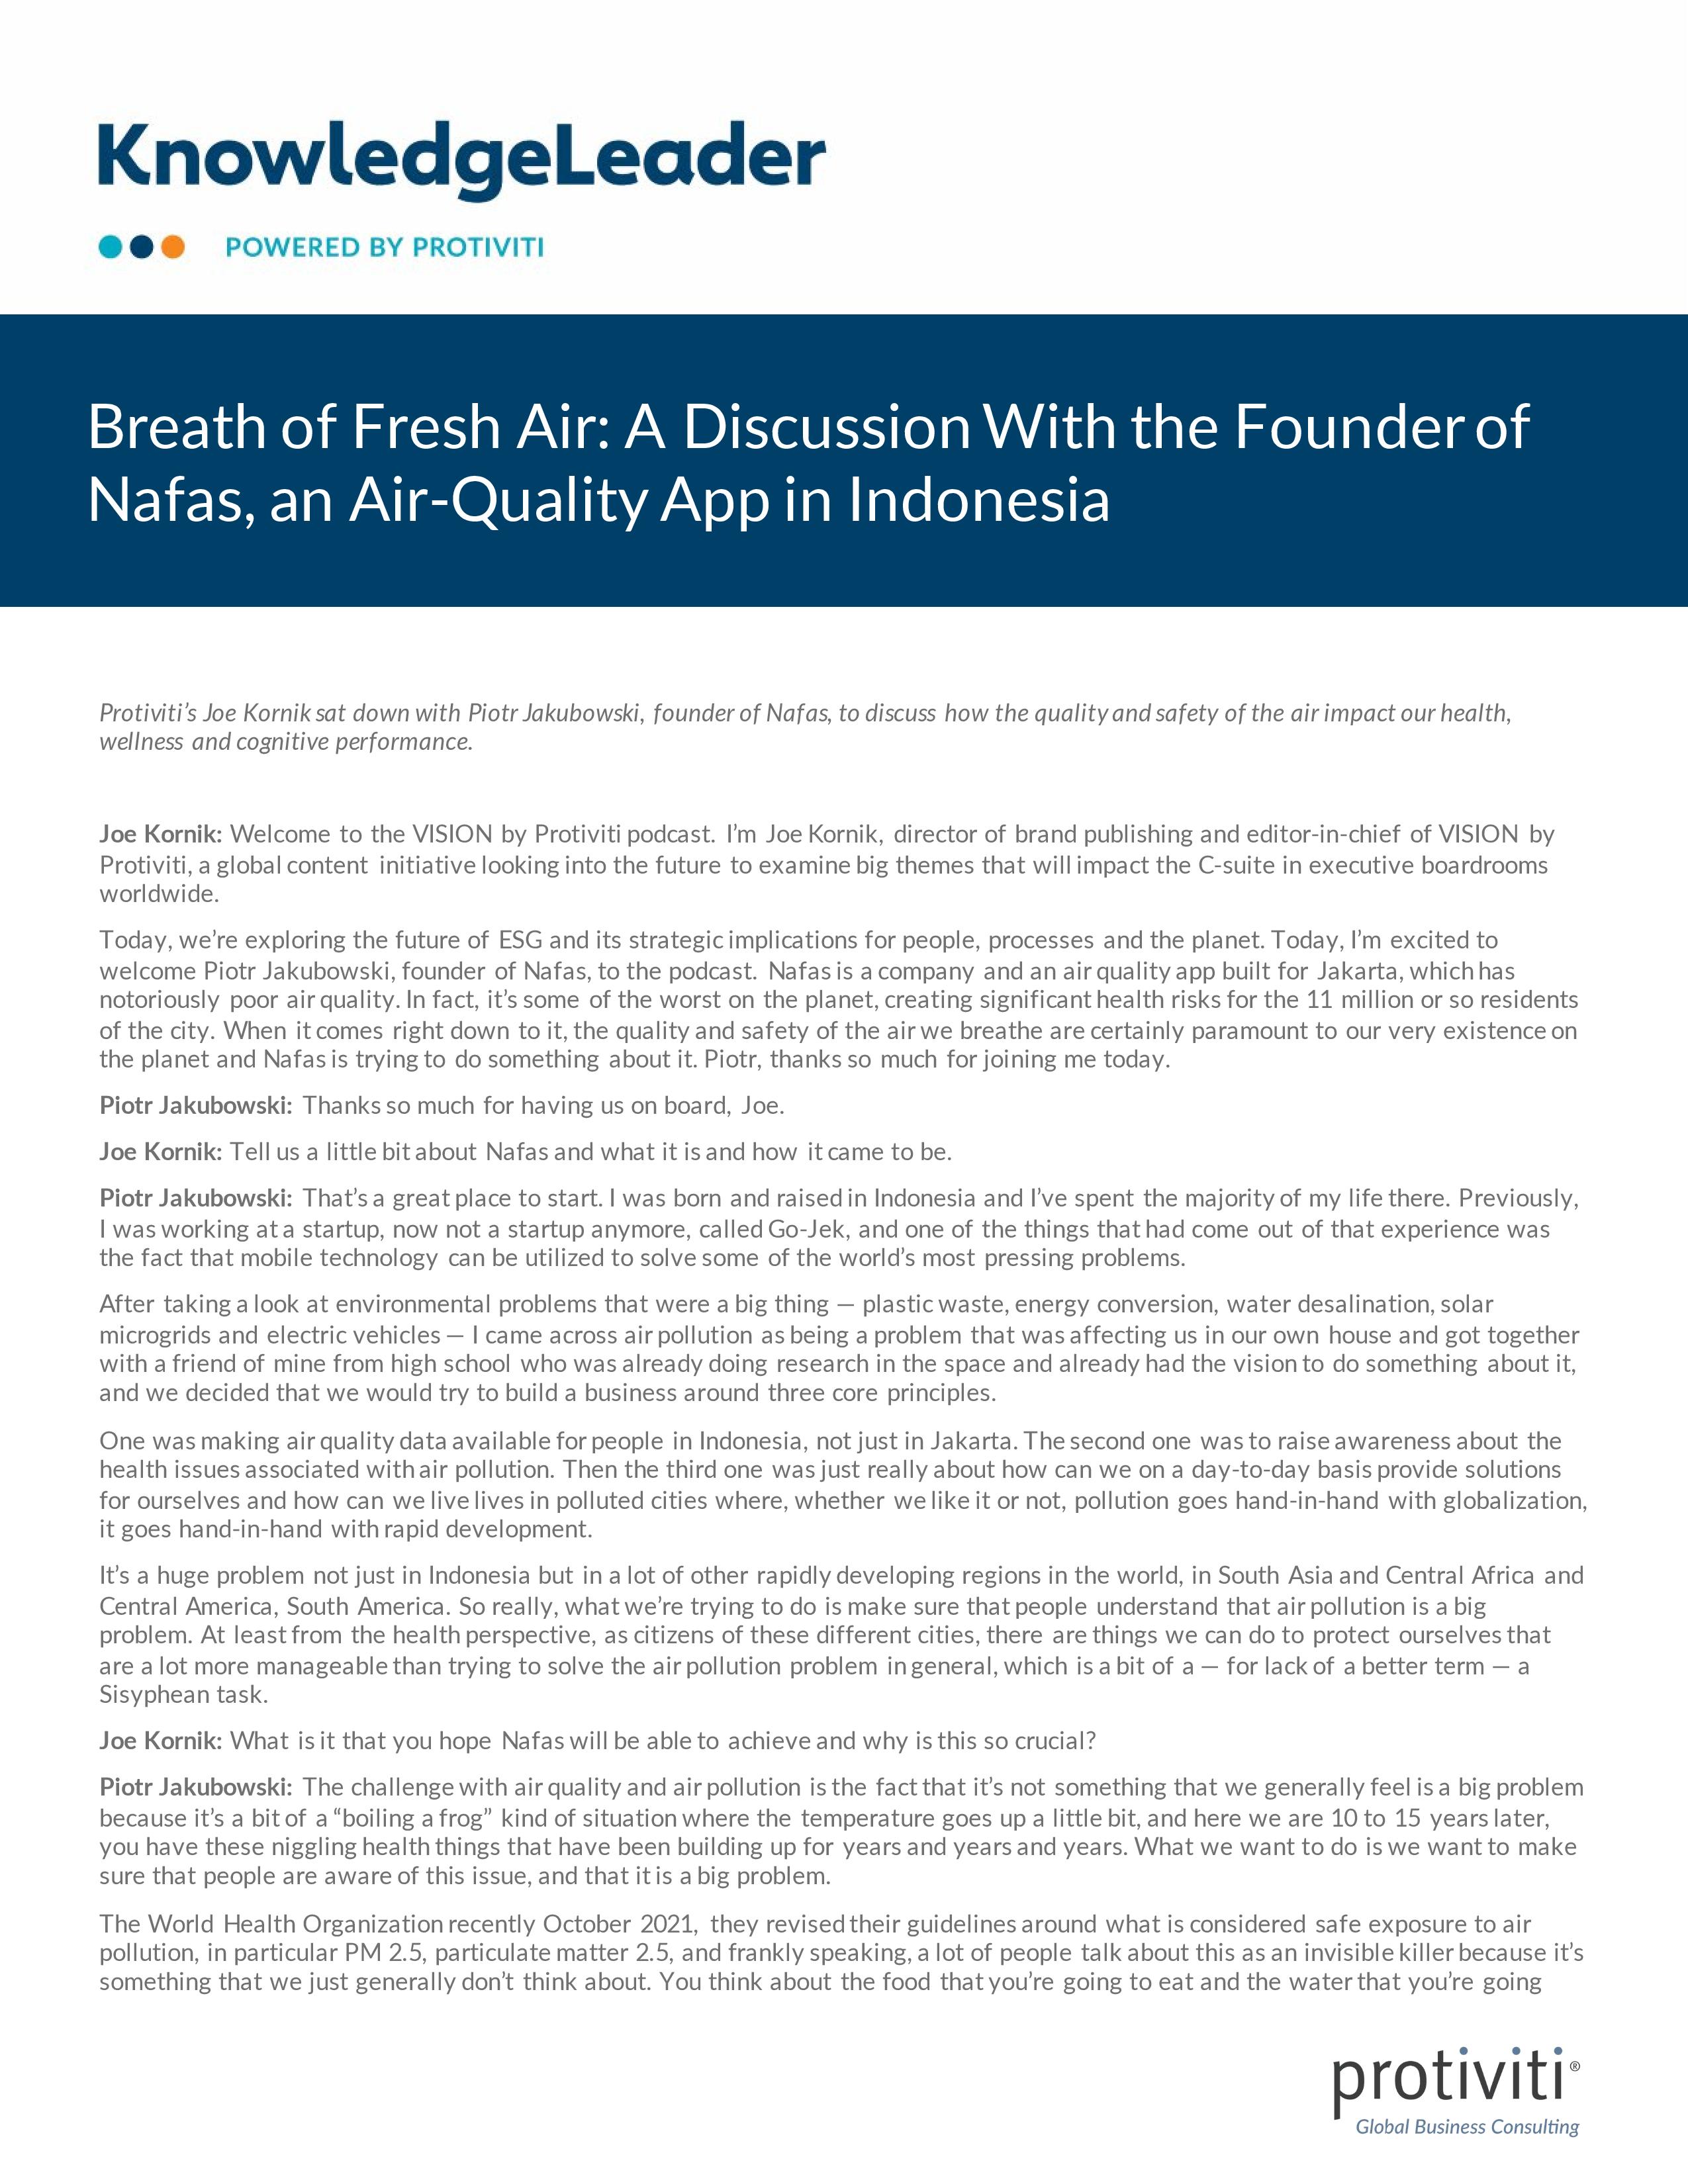 Screenshot of the First Page of Breath of Fresh Air A Discussion With the Founder of Nafas, an Air-Quality App in Indonesia